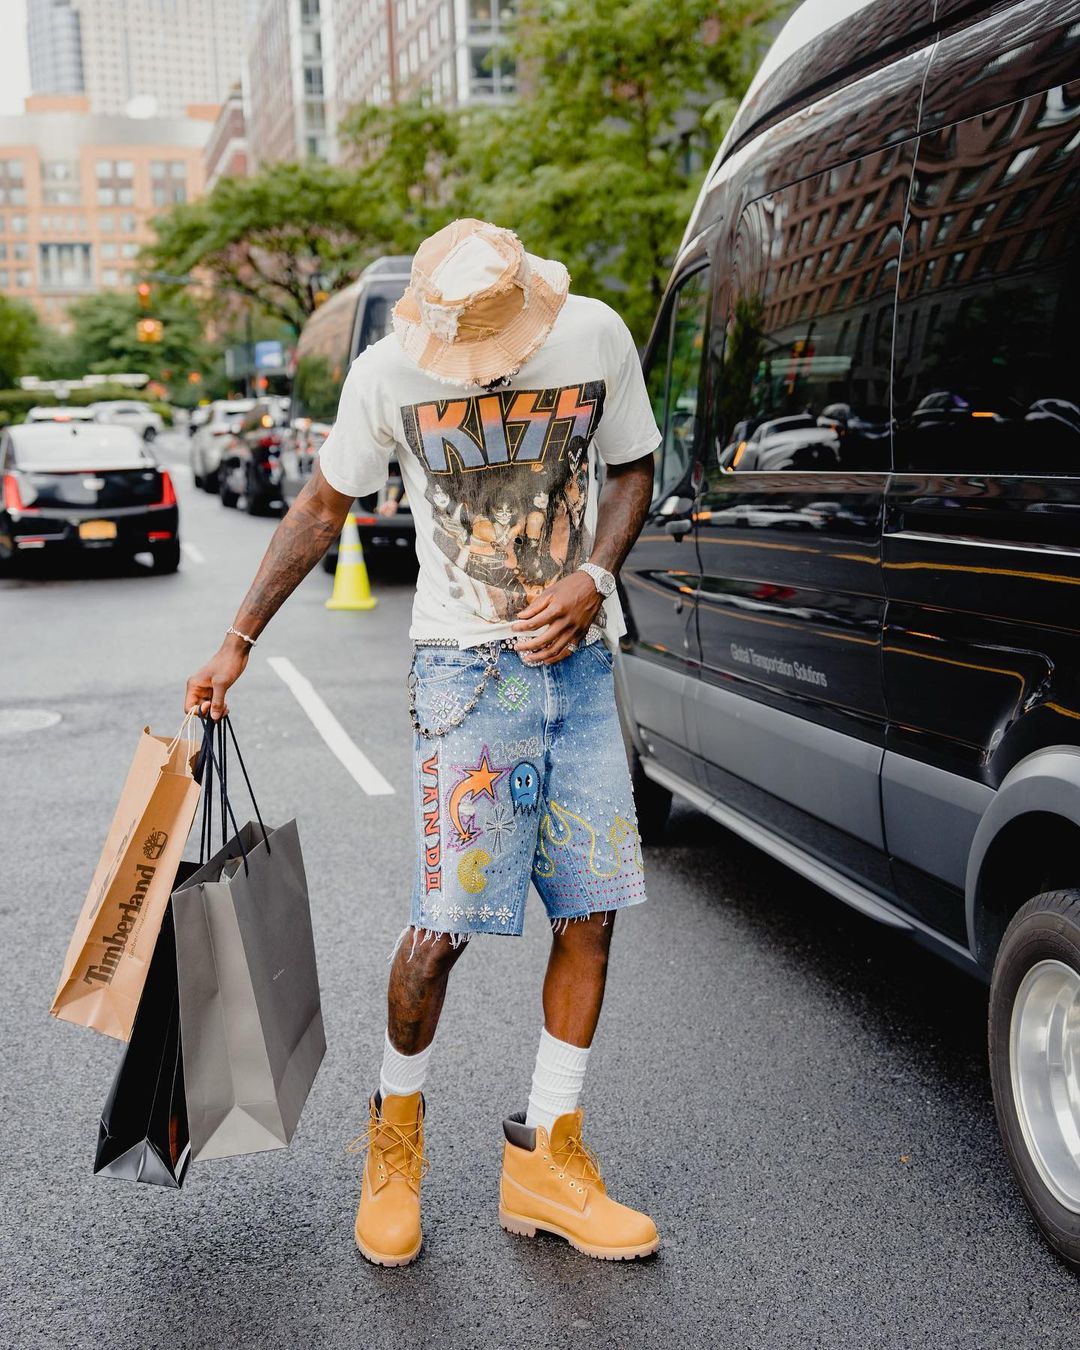 Jarred Vanderbilt attracts every attentions on LA street with eye-catching outfit